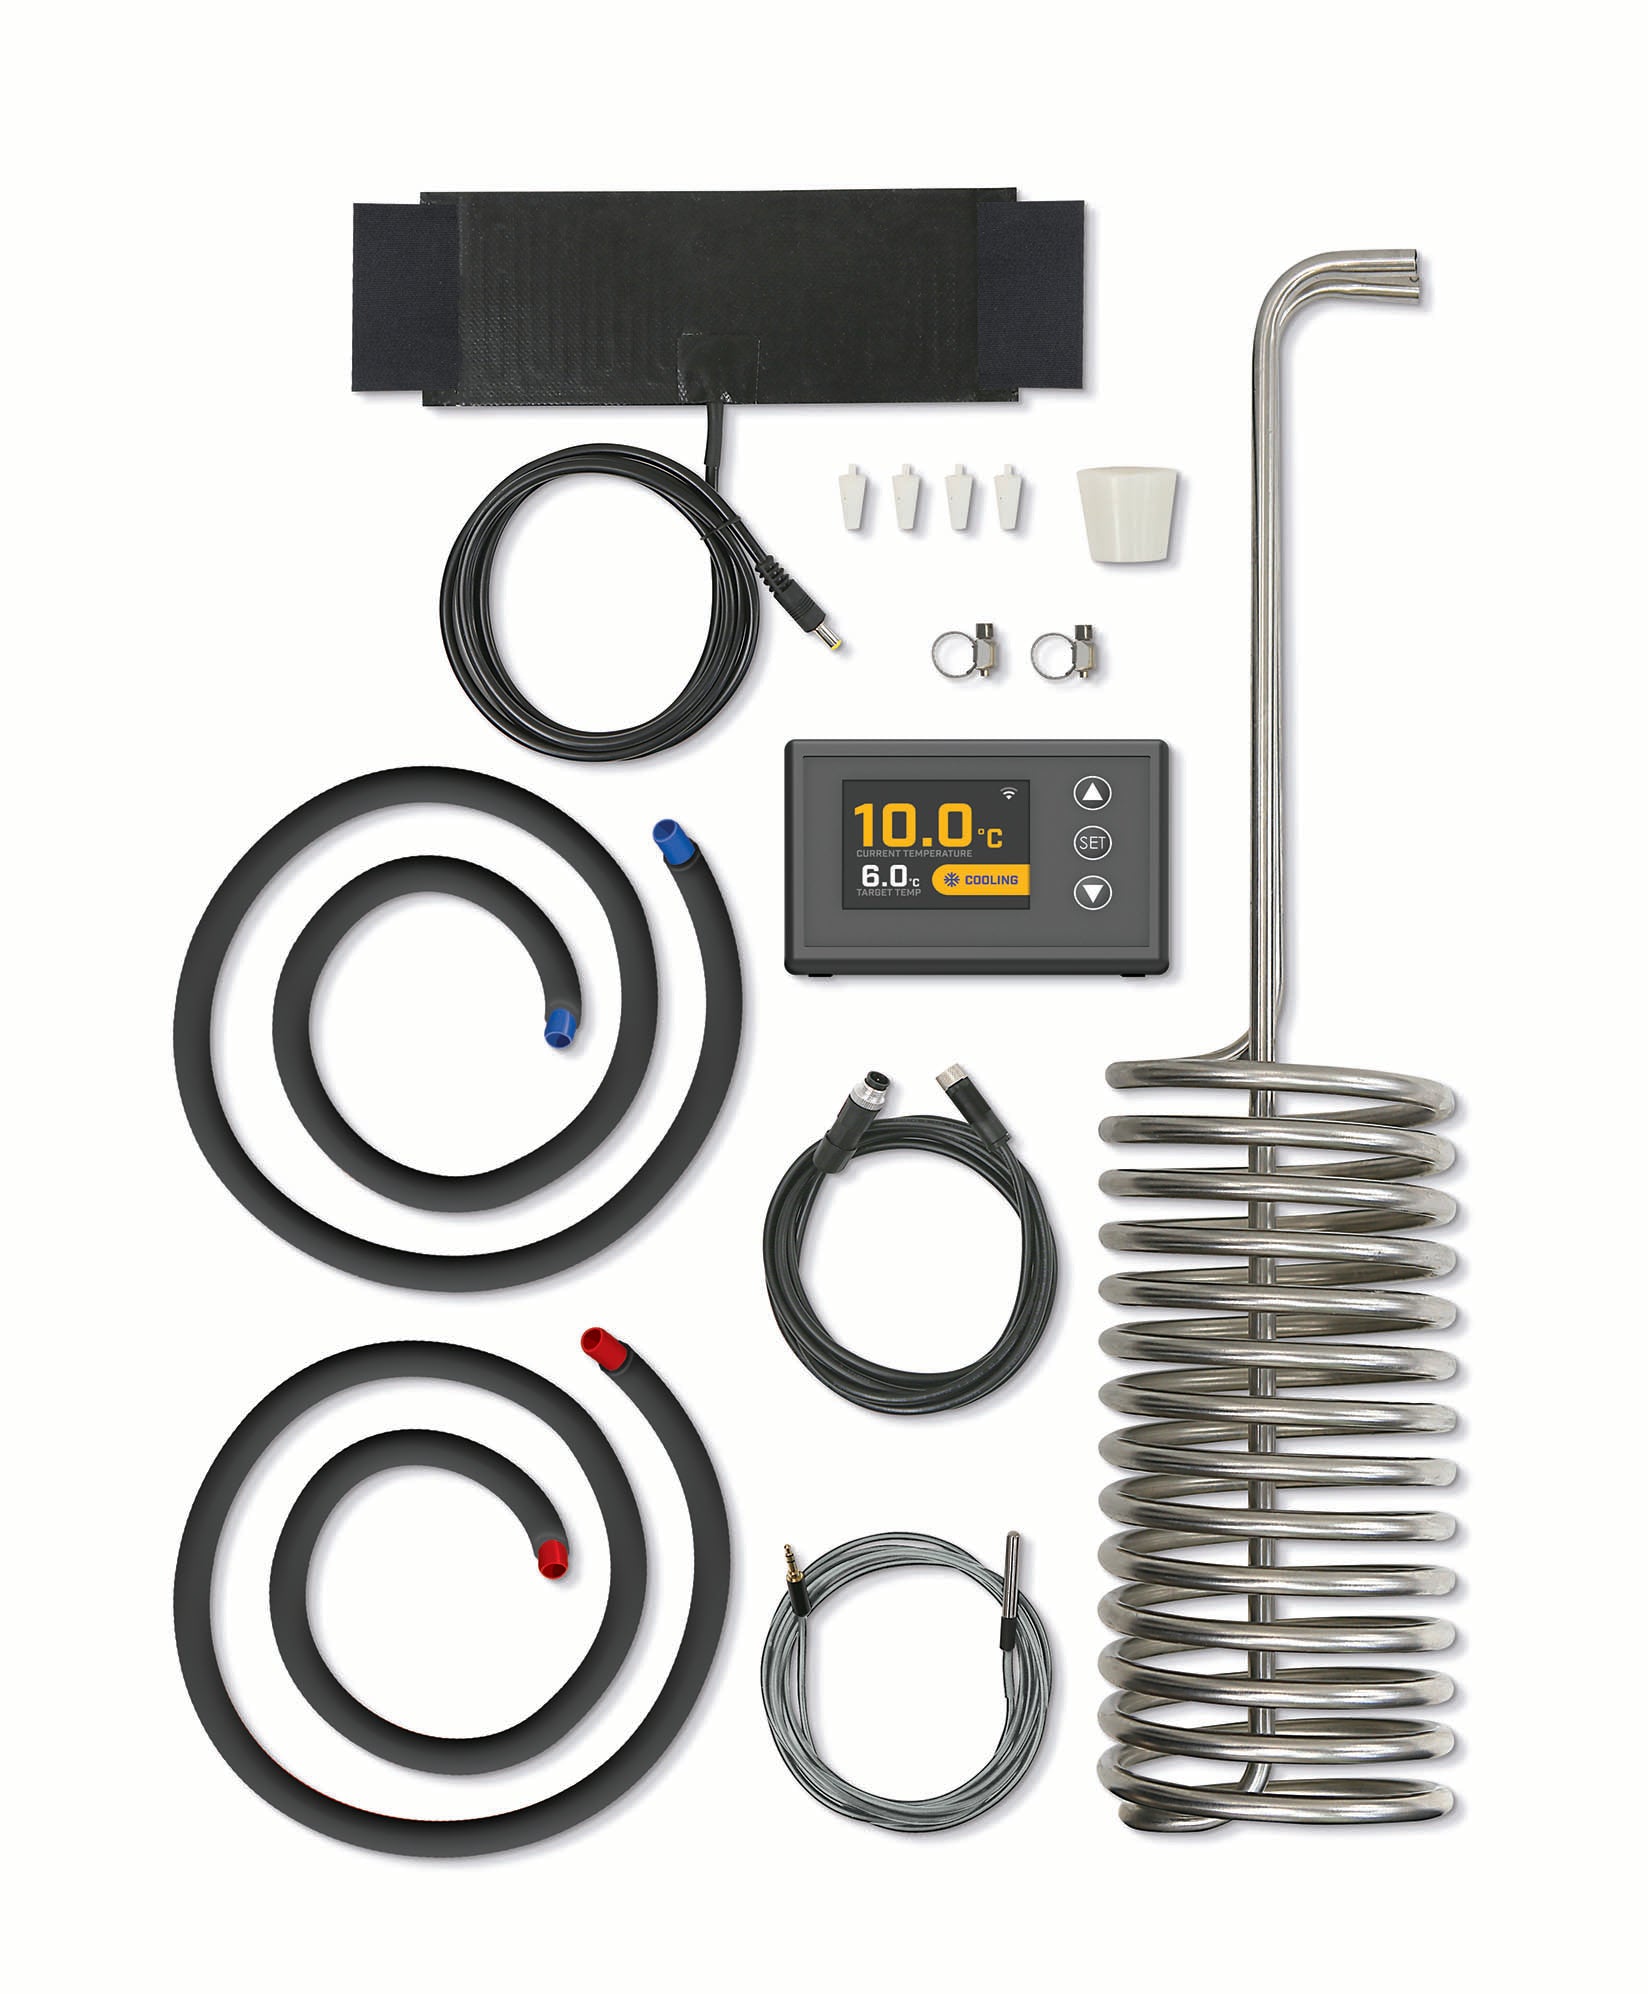 Grainfather GC4 Glycol Chiller Adapter Kit - All Things Fermented | Home Brew Shop NZ | Supplies | Equipment